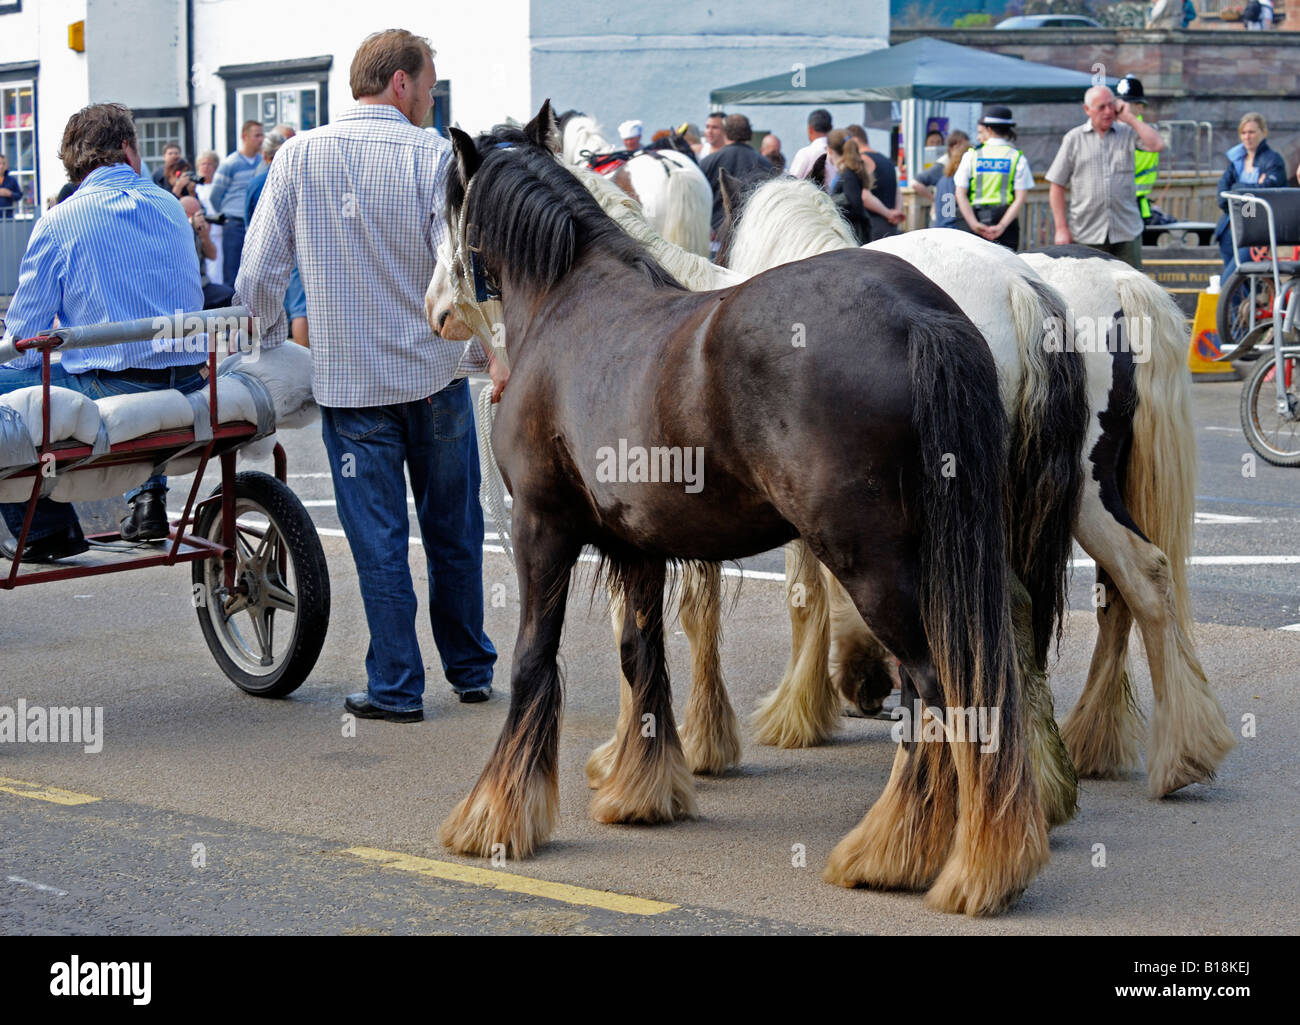 Gypsy travellers with horses at Appleby Horse Fair. Appleby-in-Westmorland, Cumbria, England, United Kingdom, Europe. Stock Photo